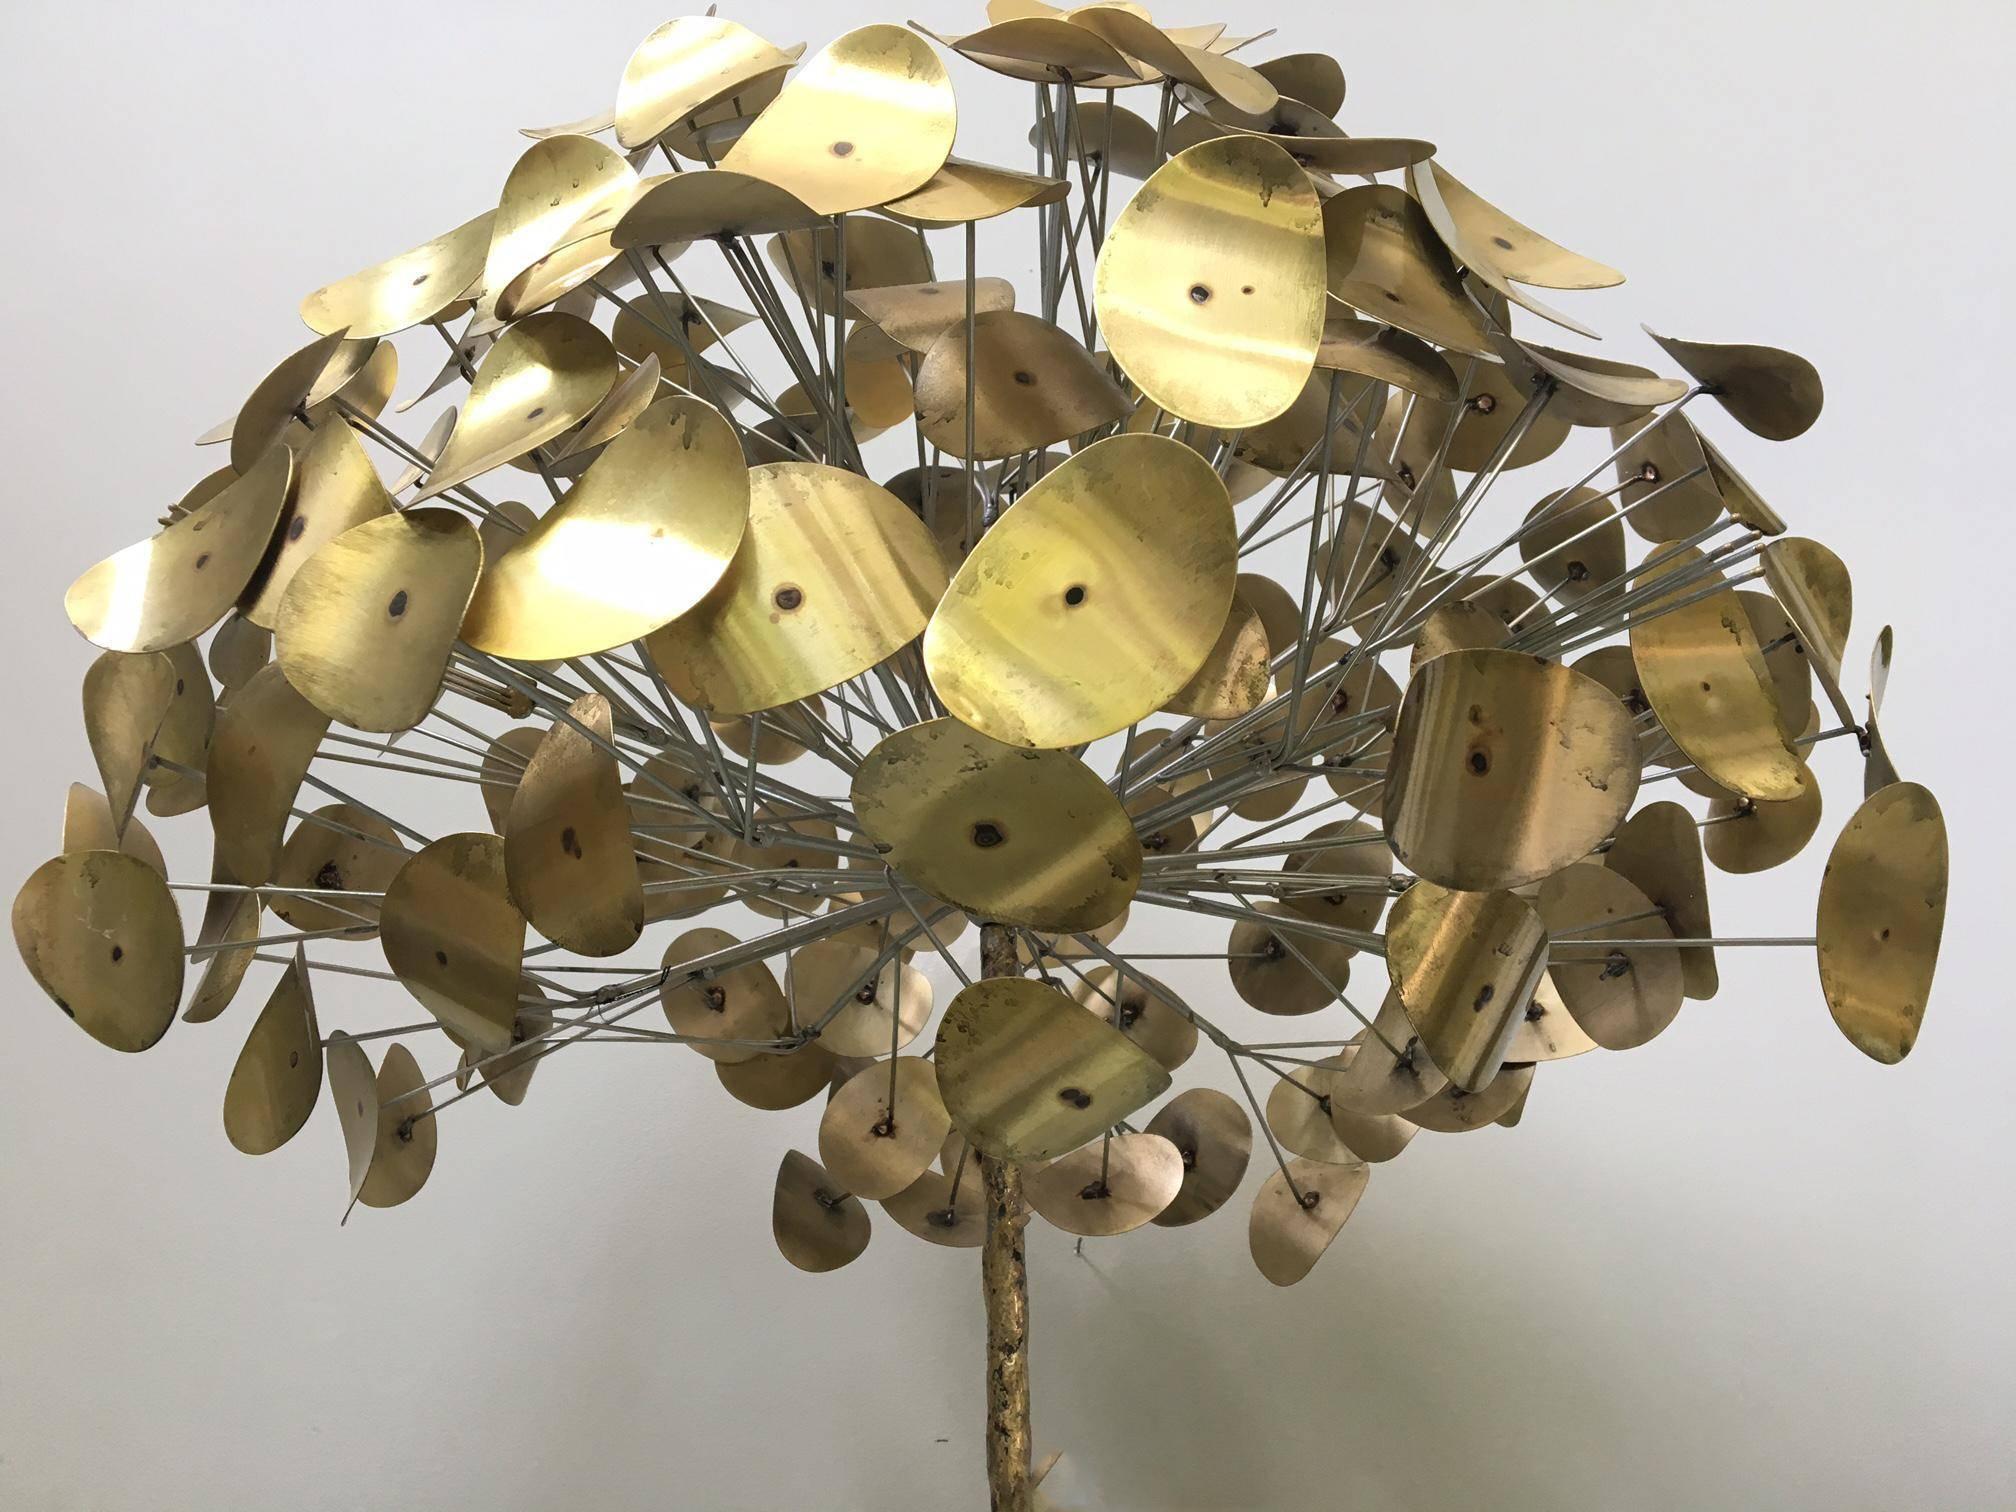 Rare Mid-Century Modern tree sculpture by C. Jere from the Raindrop series. In an exclusive partnership with Jonathan Adler, the sculpture was reissued by the Jere studio in very limited numbers. 
Brass leaves on steel rods mounted in a black